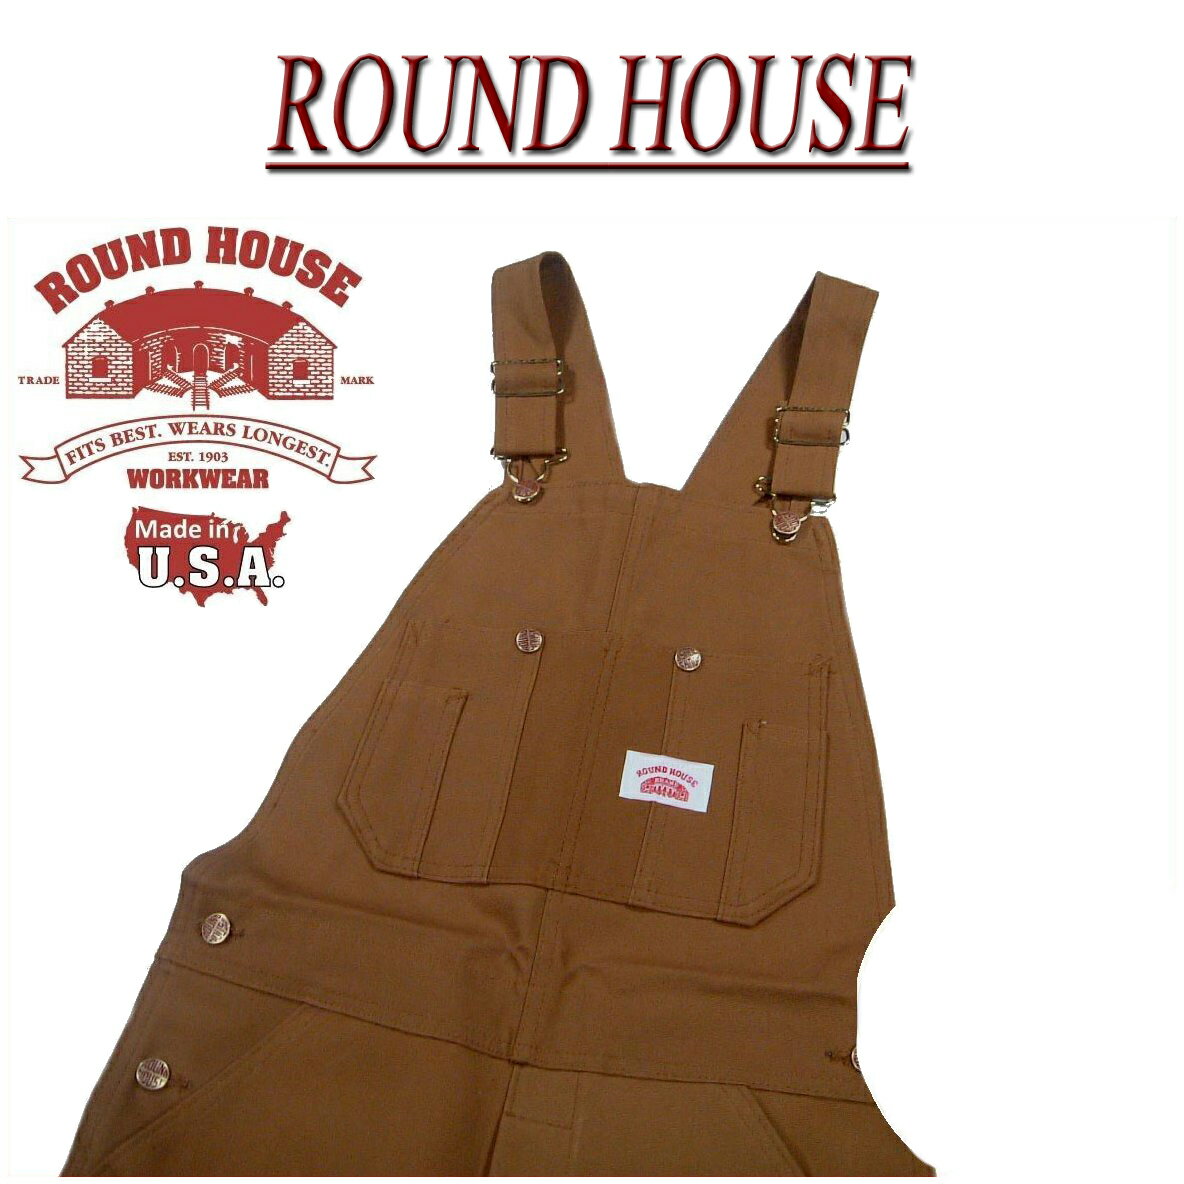   7TCY  af111 Vi ROUND HOUSE USA HEAVY DUTY DUCK OVERALLS uE _bN I[o[I[ Lot83 Y EhnEX AJW [N  smtb-kd  RoundHouse Made in USA